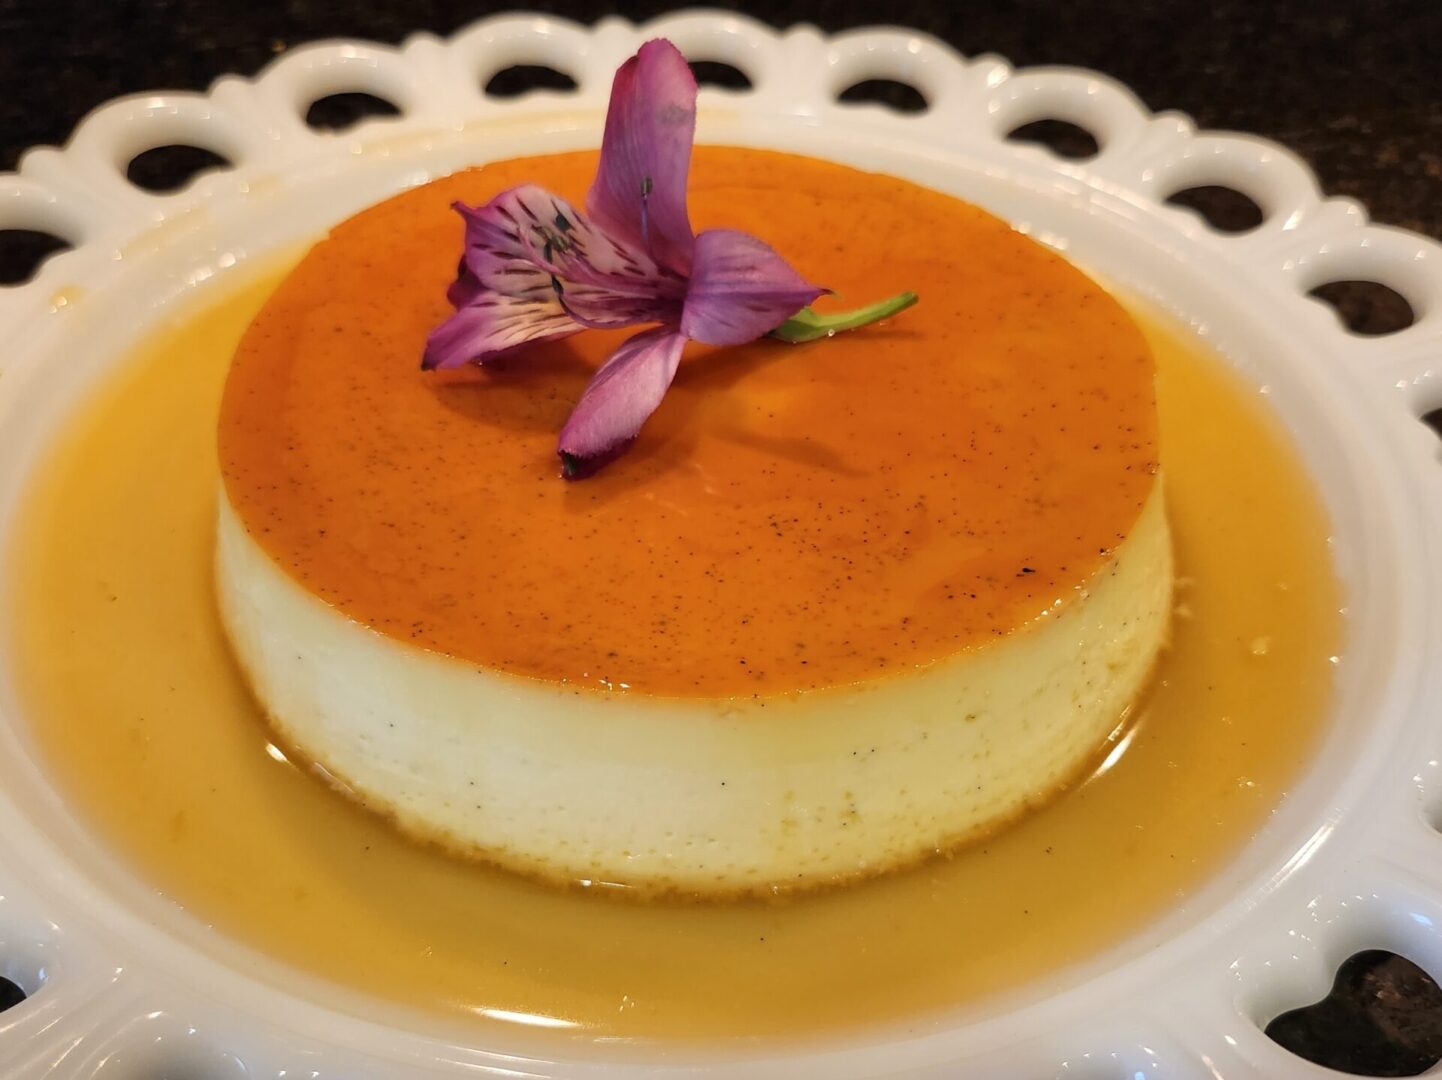 A flan topped with a purple flower on a white decorative plate, featured in The Friday Baking Project blog.